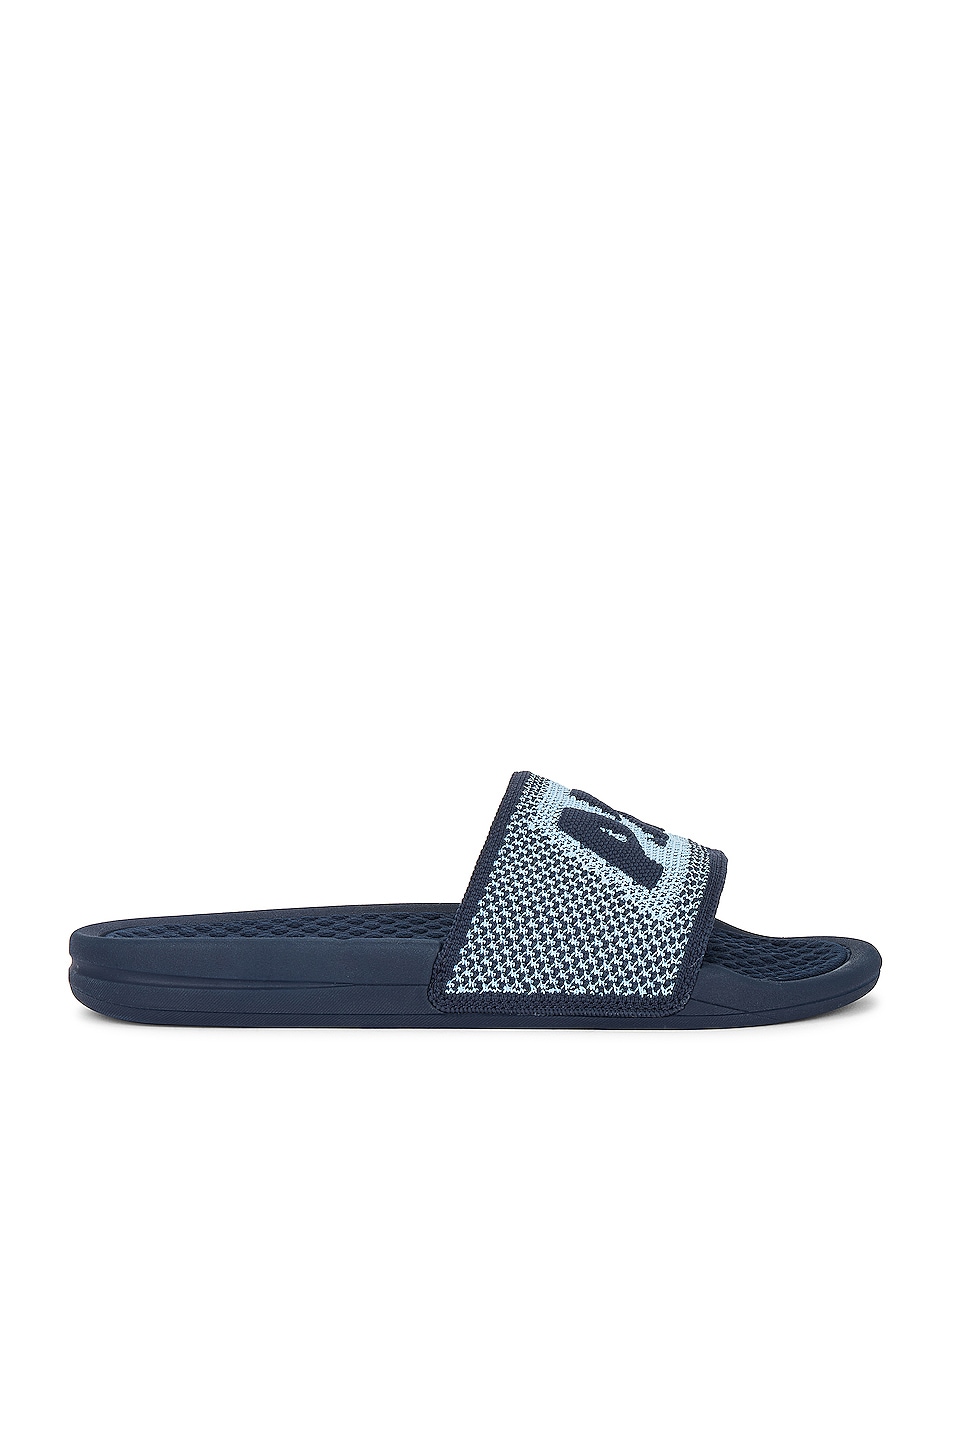 Image 1 of APL: Athletic Propulsion Labs Techloom Slide in Midnight & Ice Blue